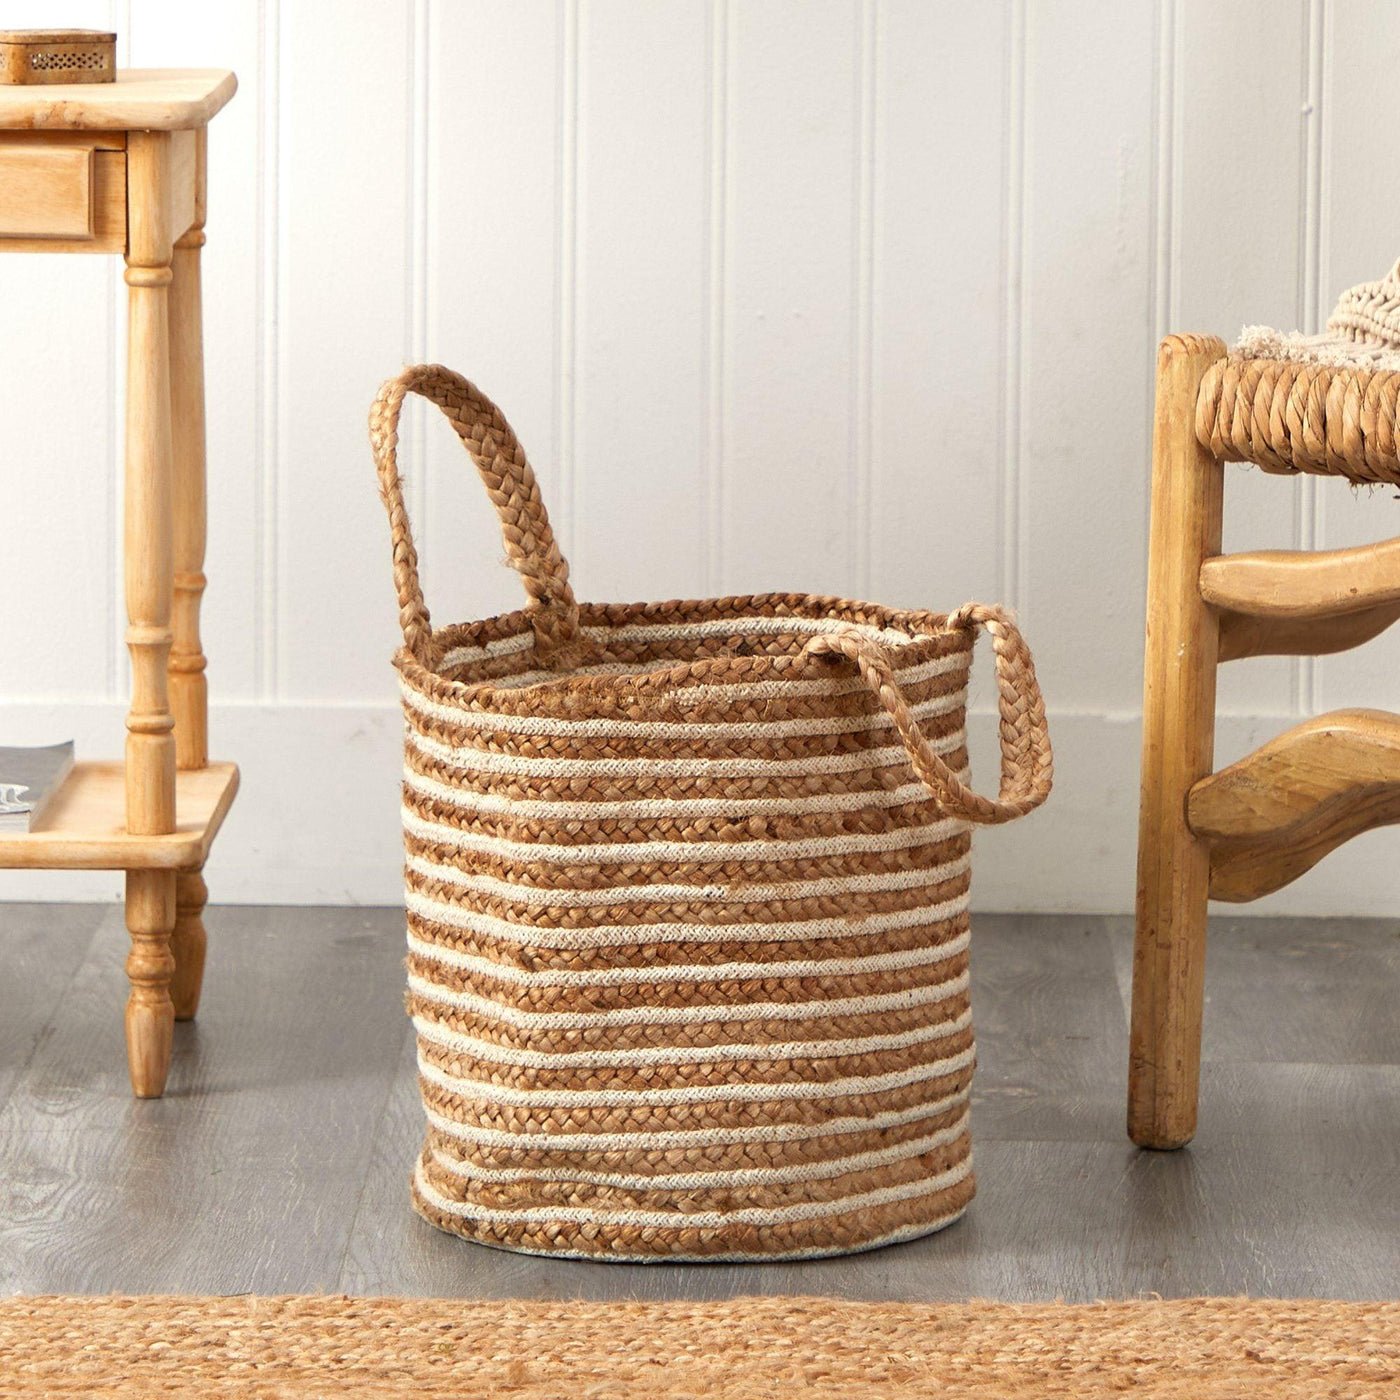 14” Boho Chic Basket Natural Cotton and Jute, Handwoven Stripe with Handles by Nearly Natural - Vysn